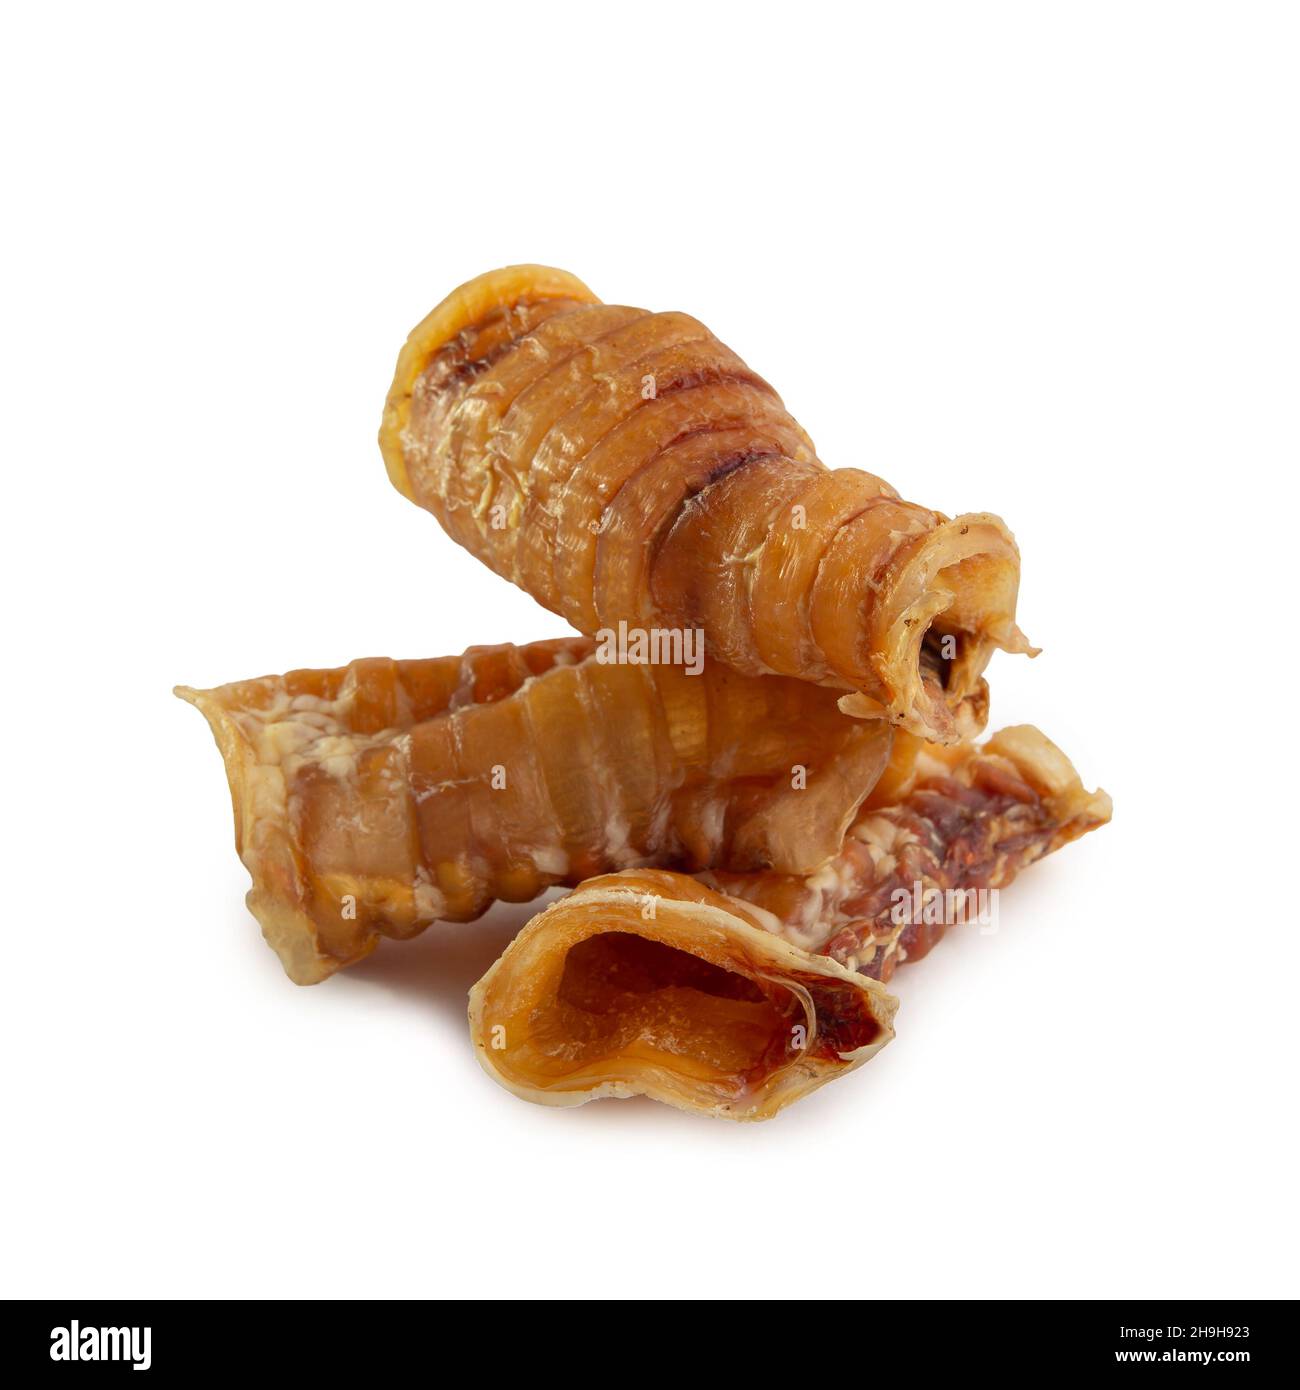 Food for dogs - dried beef offal (trachea) isolated on white background. Natural chewing treats. Stock Photo